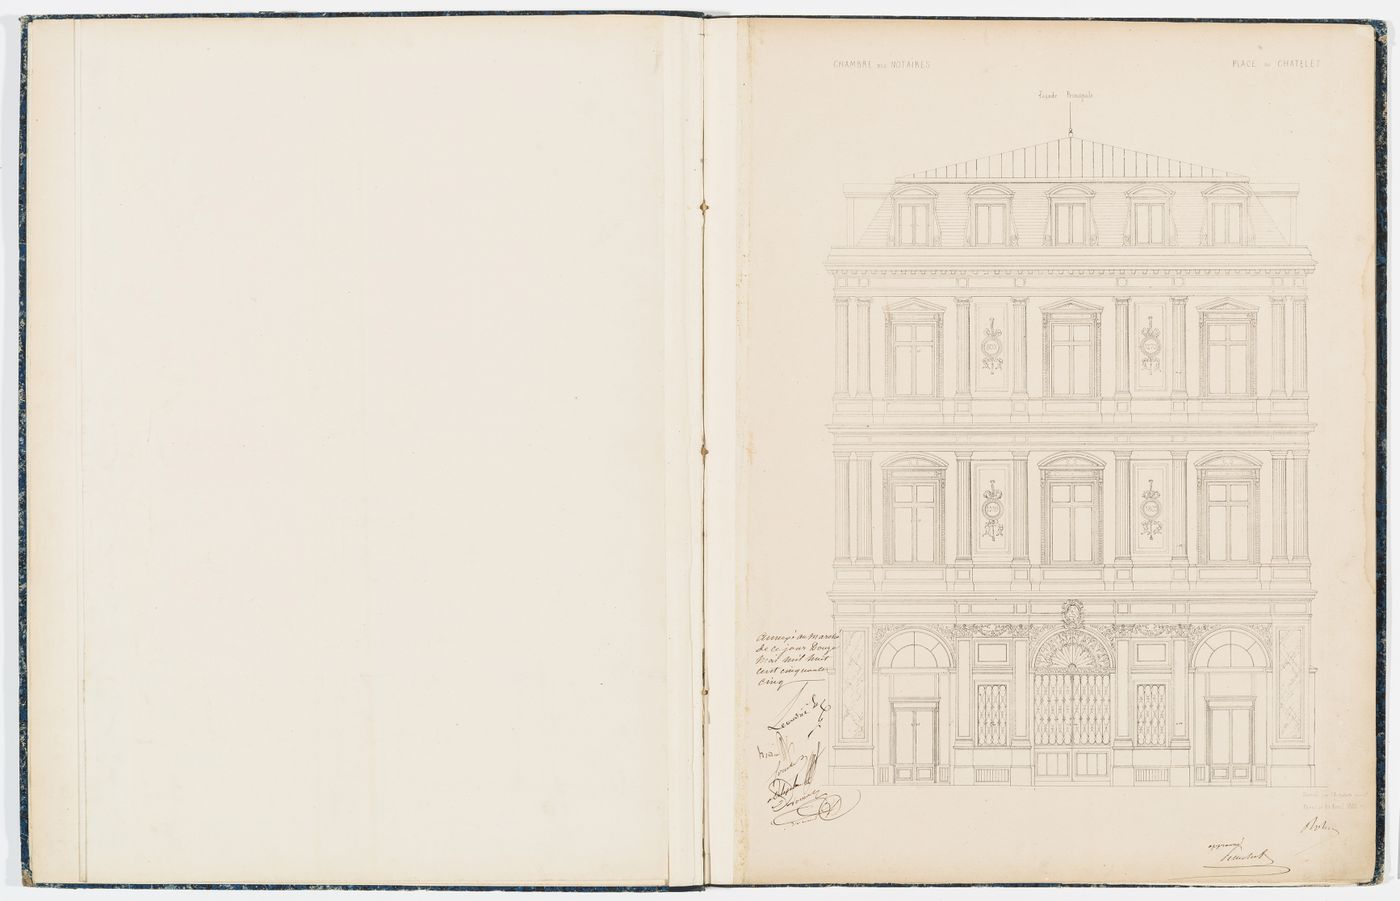 Contract drawing for the Chambre des Notaires: Elevation for the principal façade